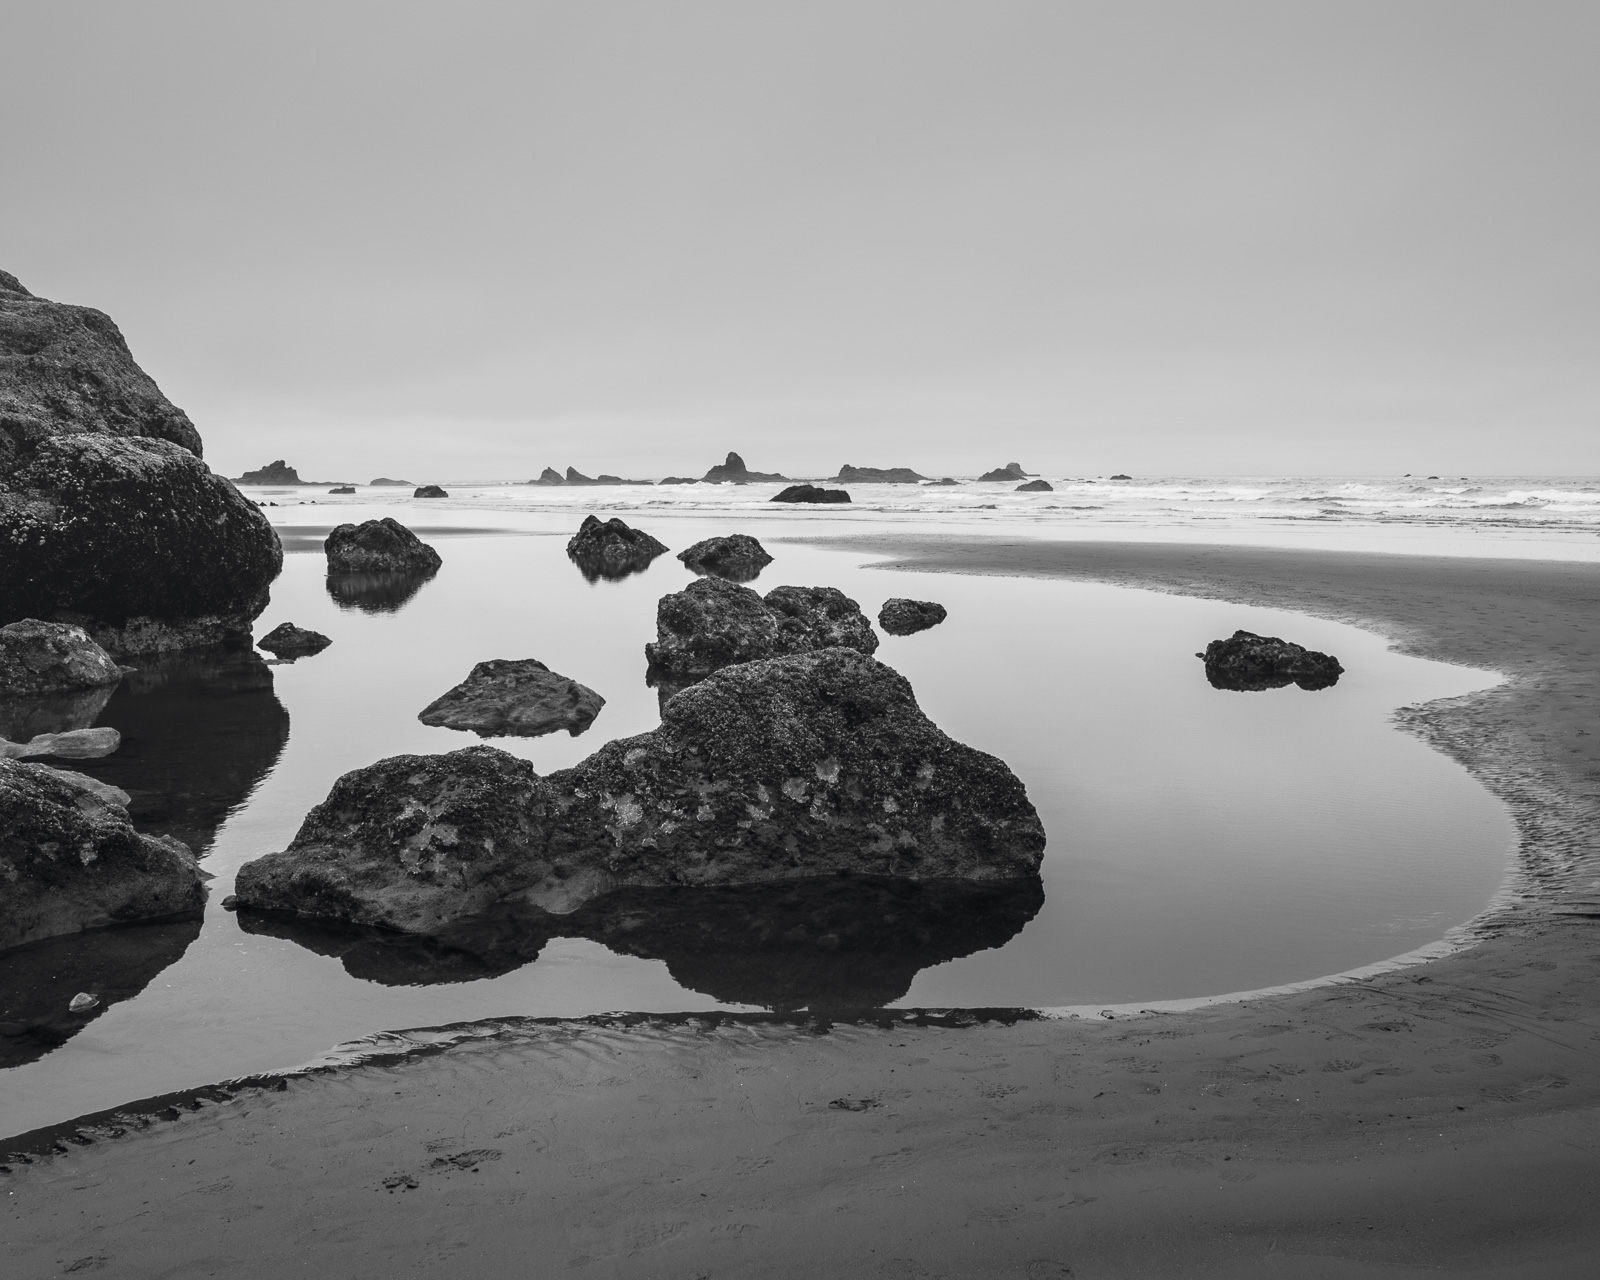 A black and white fine art photography project featuring Ruby Beach in the Olympic National Park along the coast of Washington State.